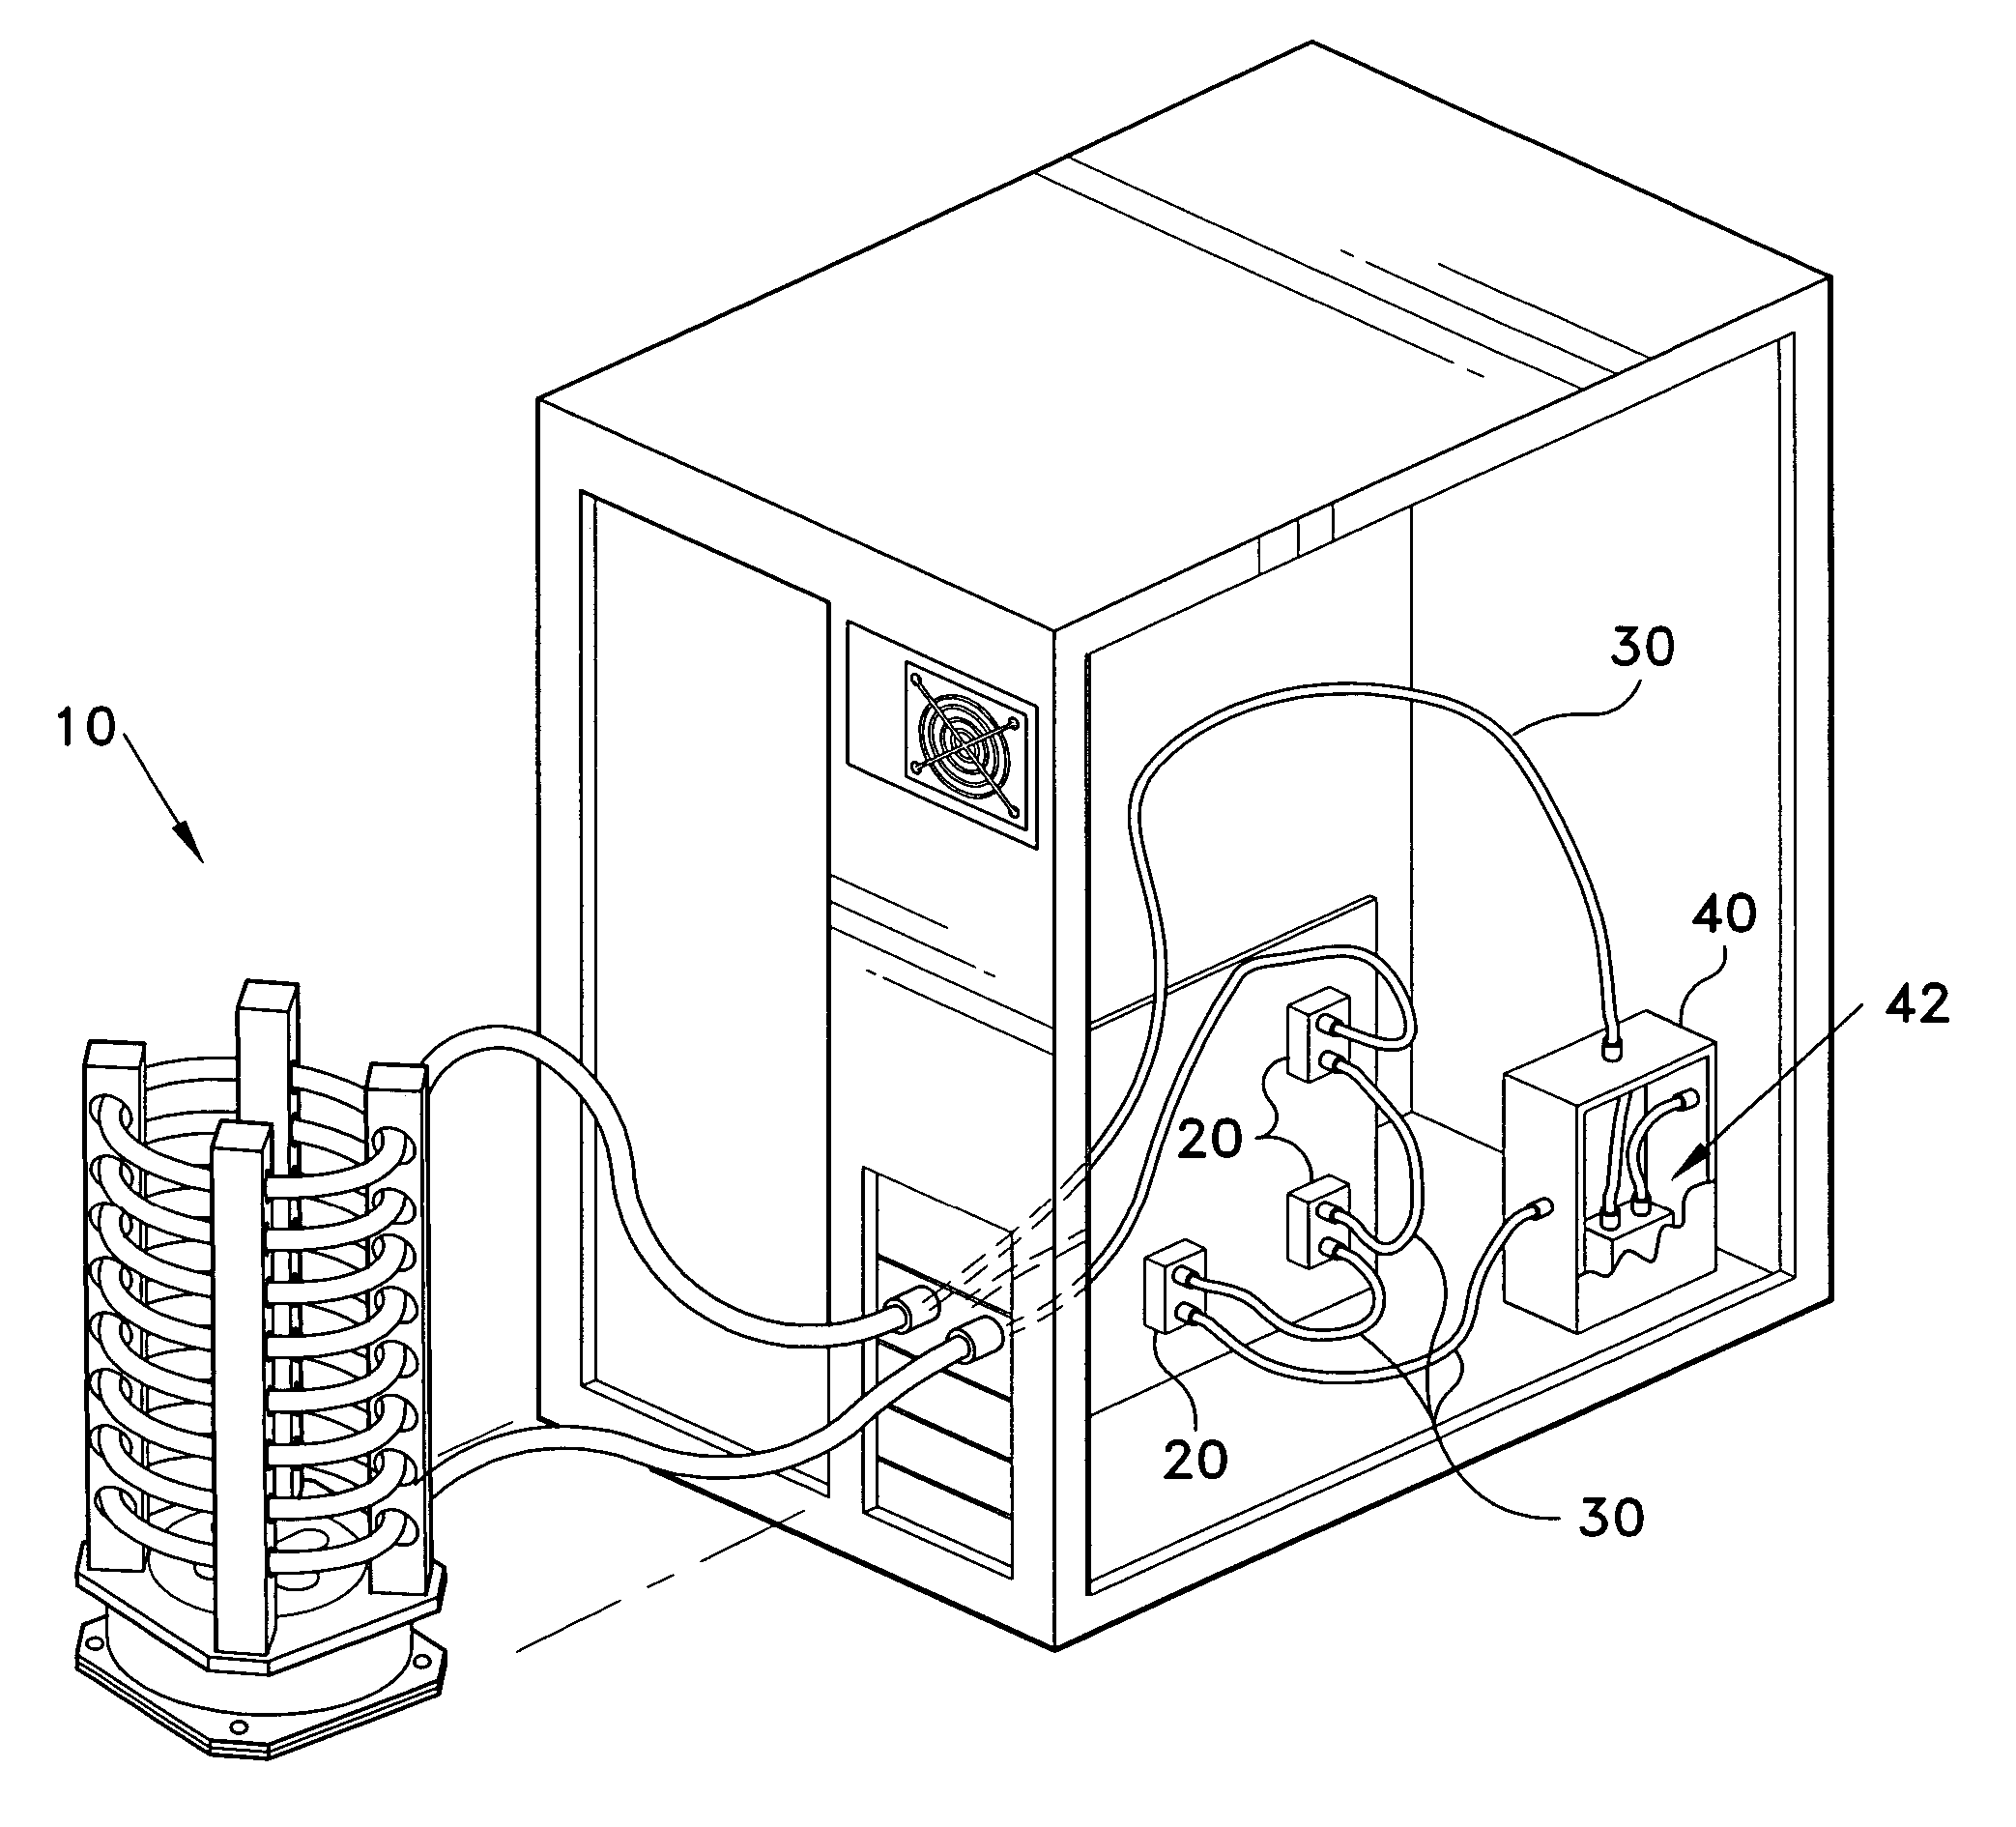 Water cooling system for computer components